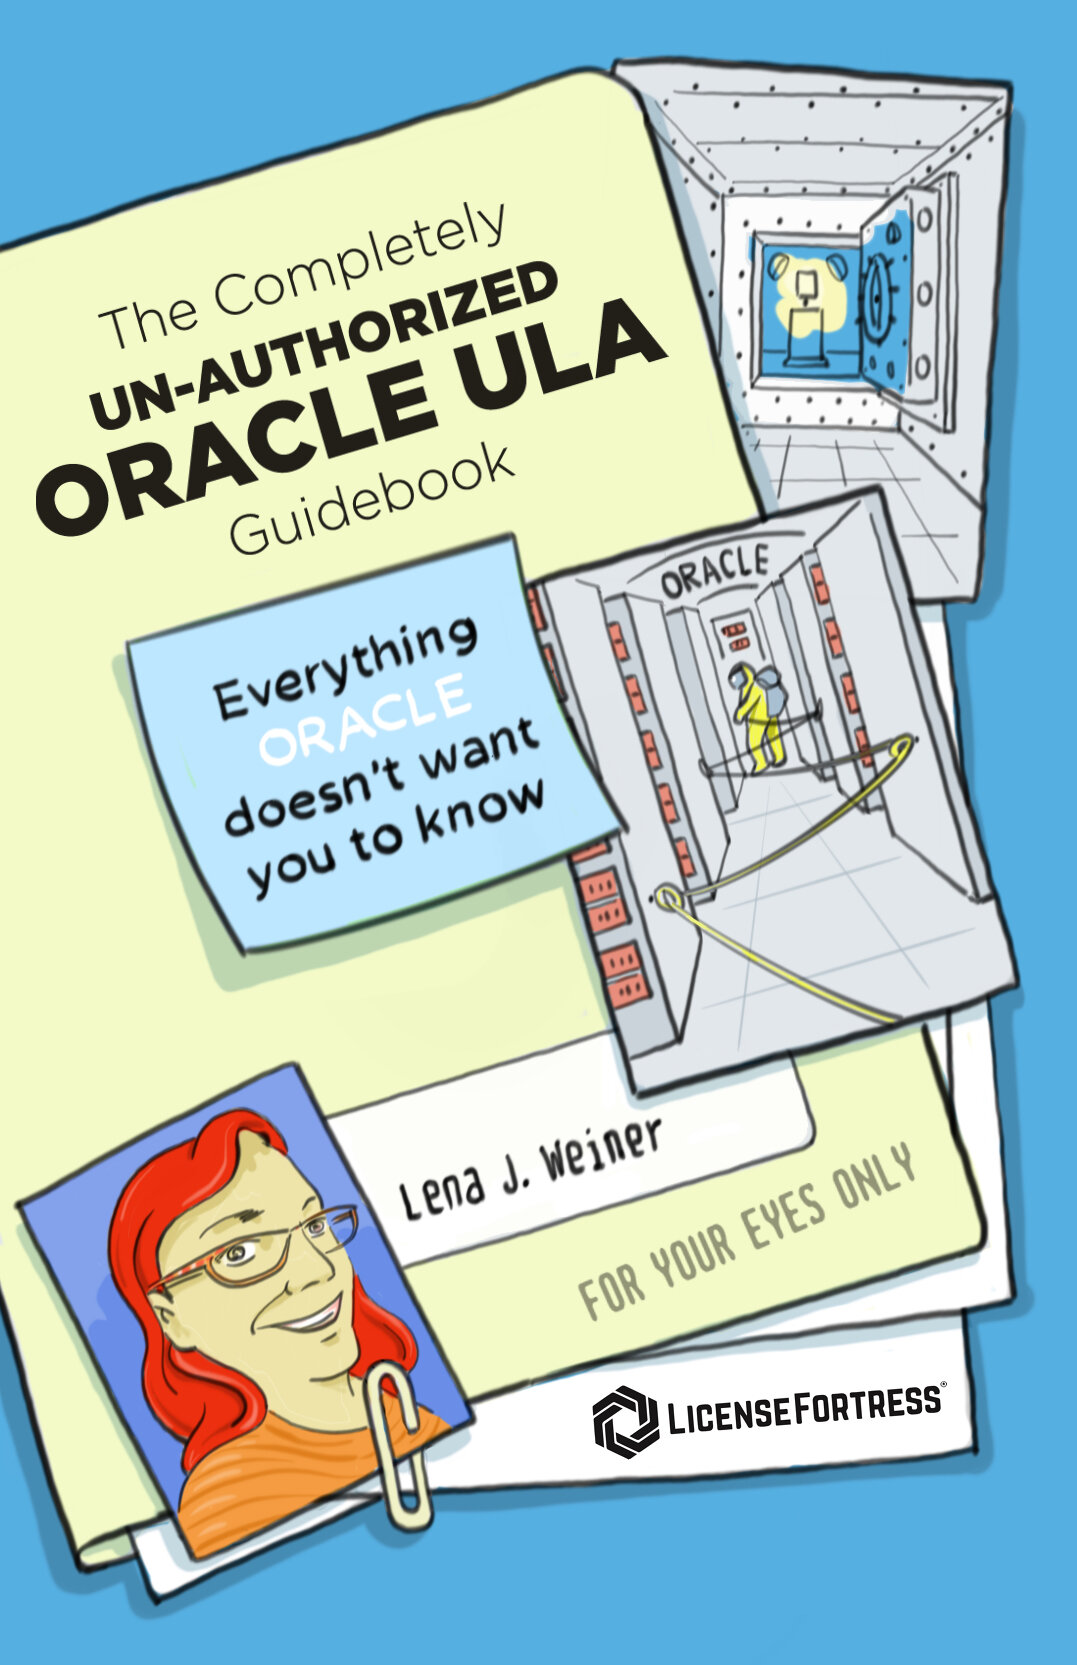 The Completely Un-Authorized Oracle ULA Guidebook